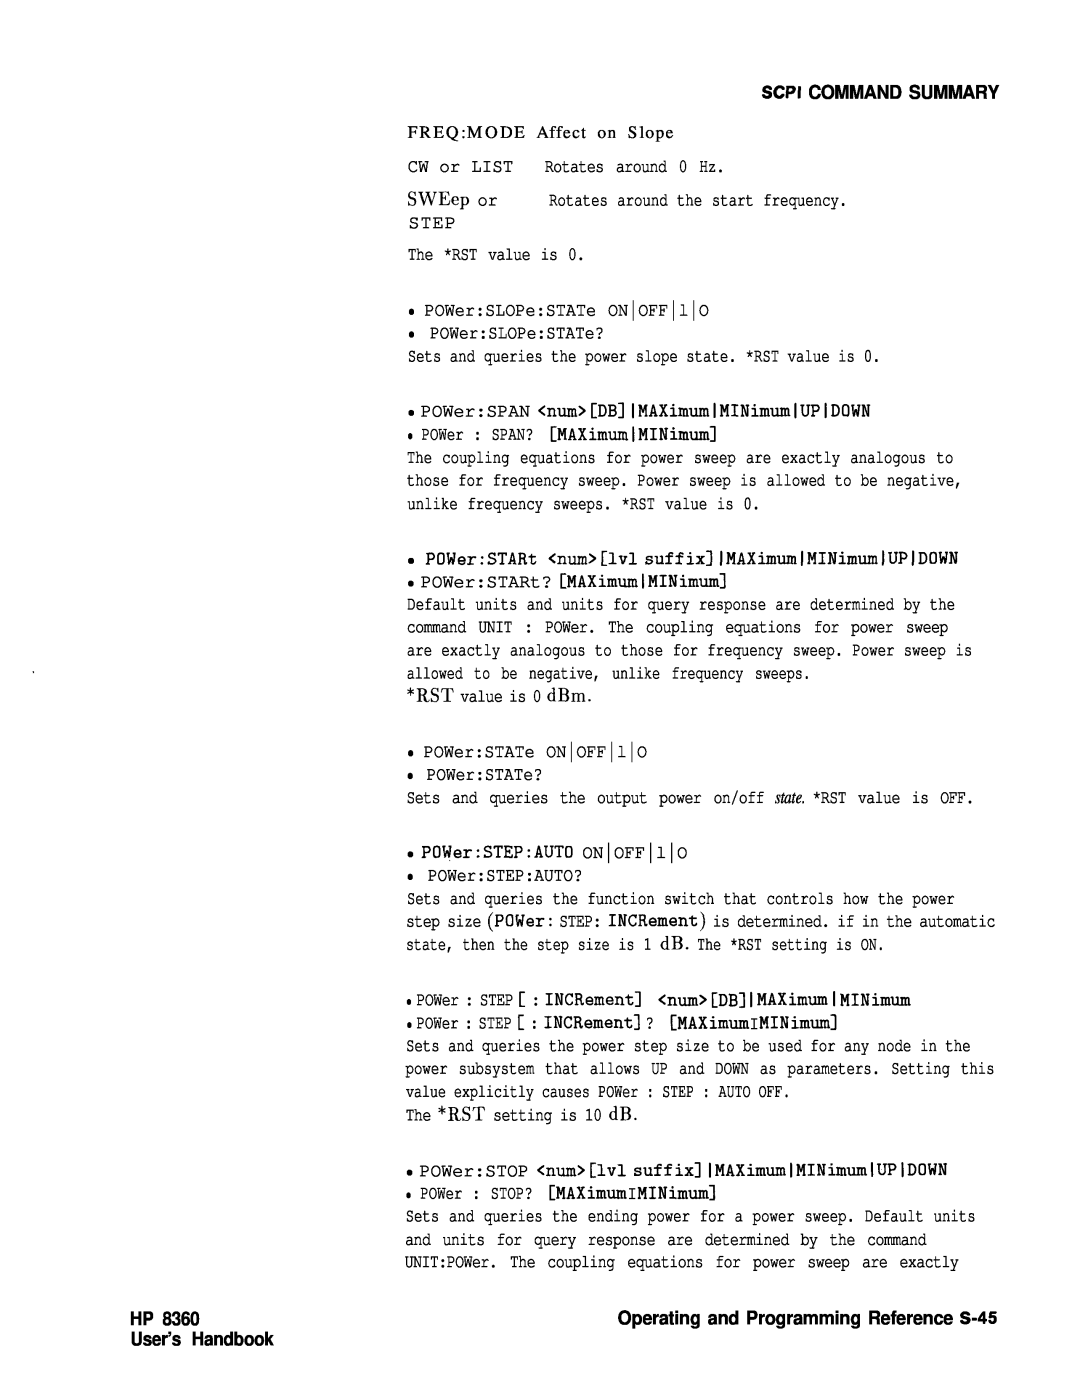 HP 24A HP User’s Handbook, Scpi Command Summary, CW or LIST Rotates around 0 Hz, Operating and Programming Reference S-45 